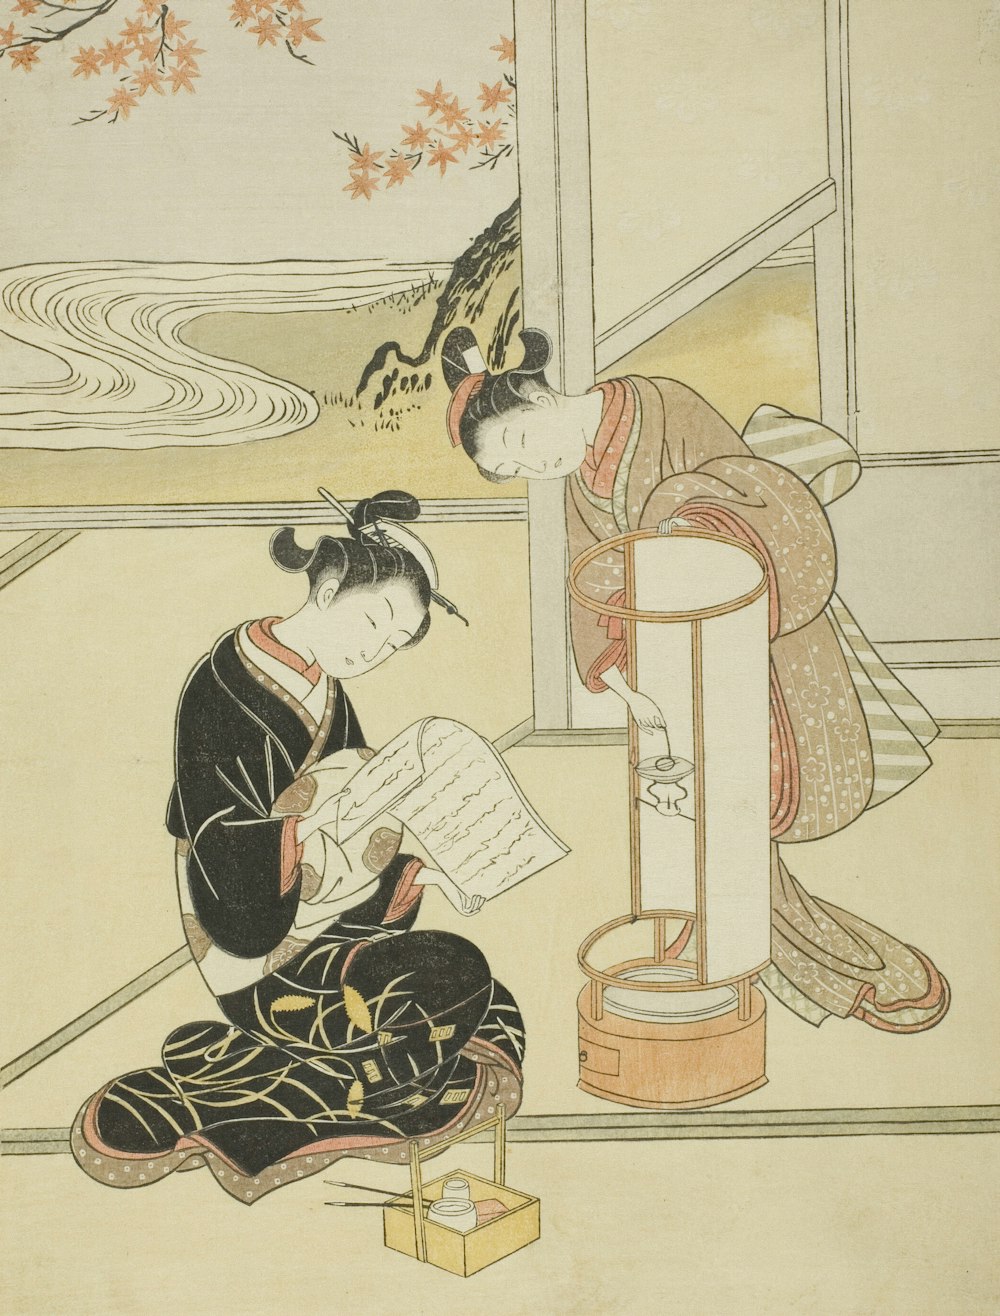 a painting of a woman reading a book